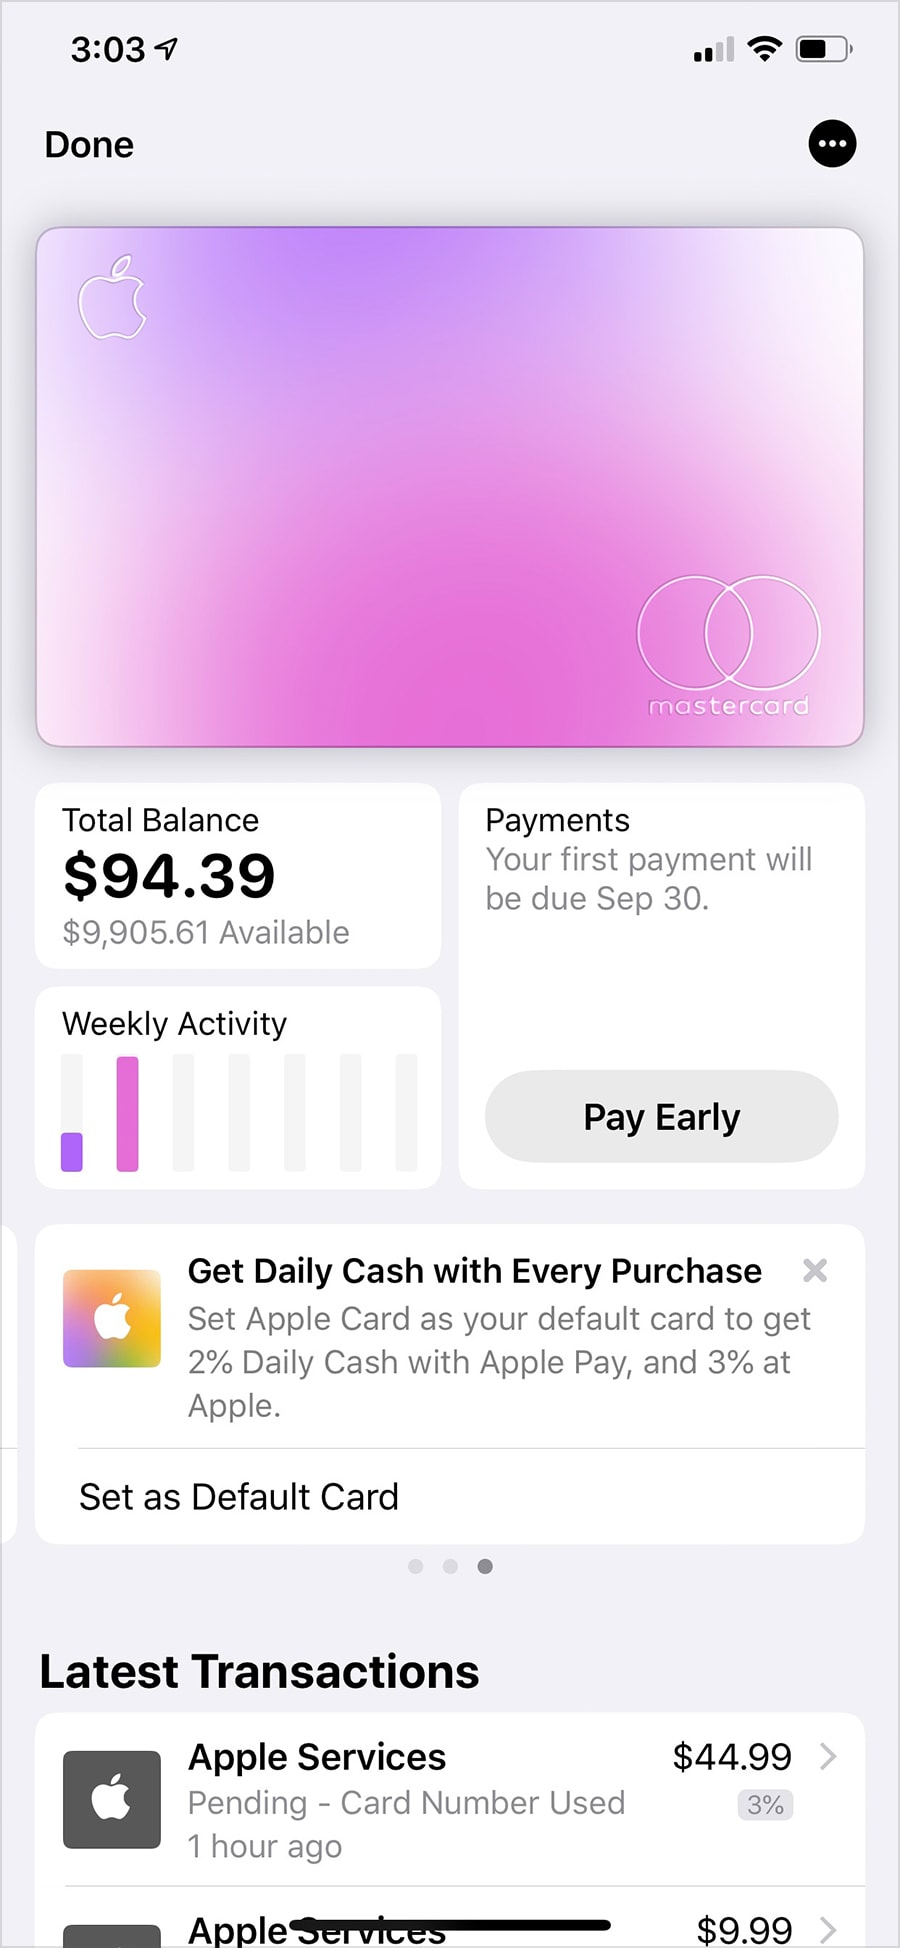 A real screen from a real Apple Card account. Believe it or not, the card at top changes colors to reflect the categories of the purchases made.